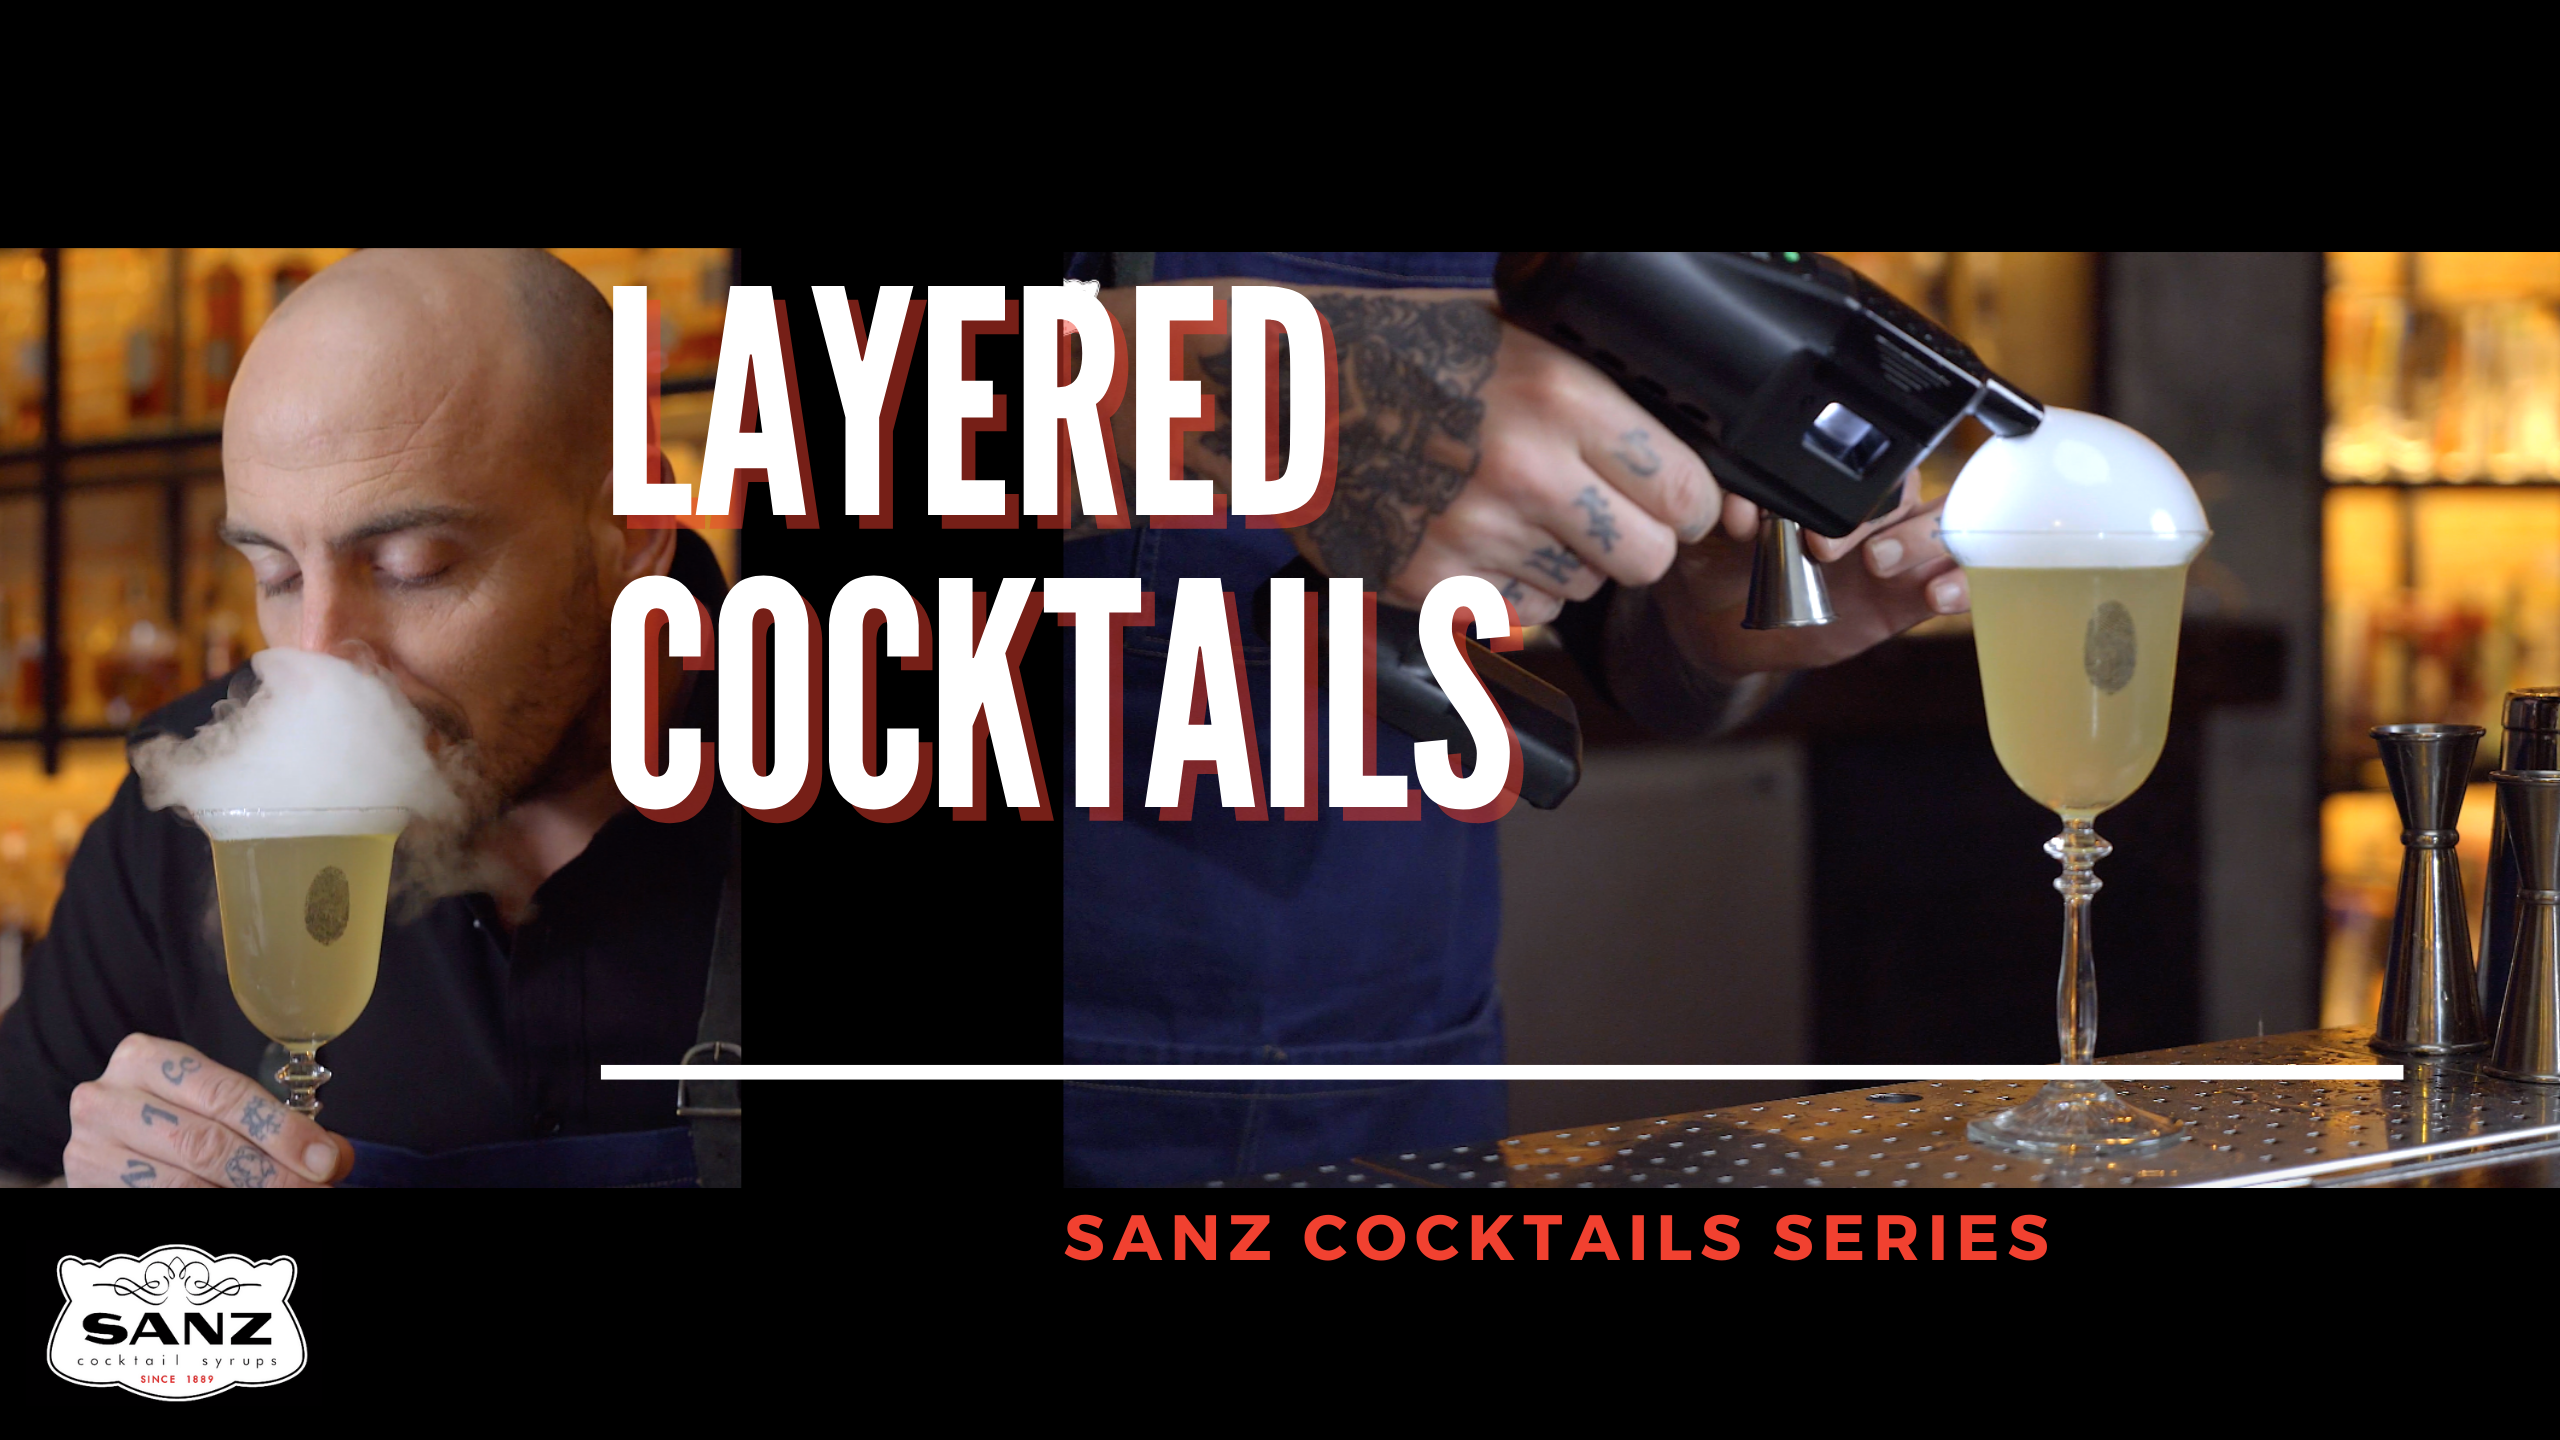 How to make layered cocktails